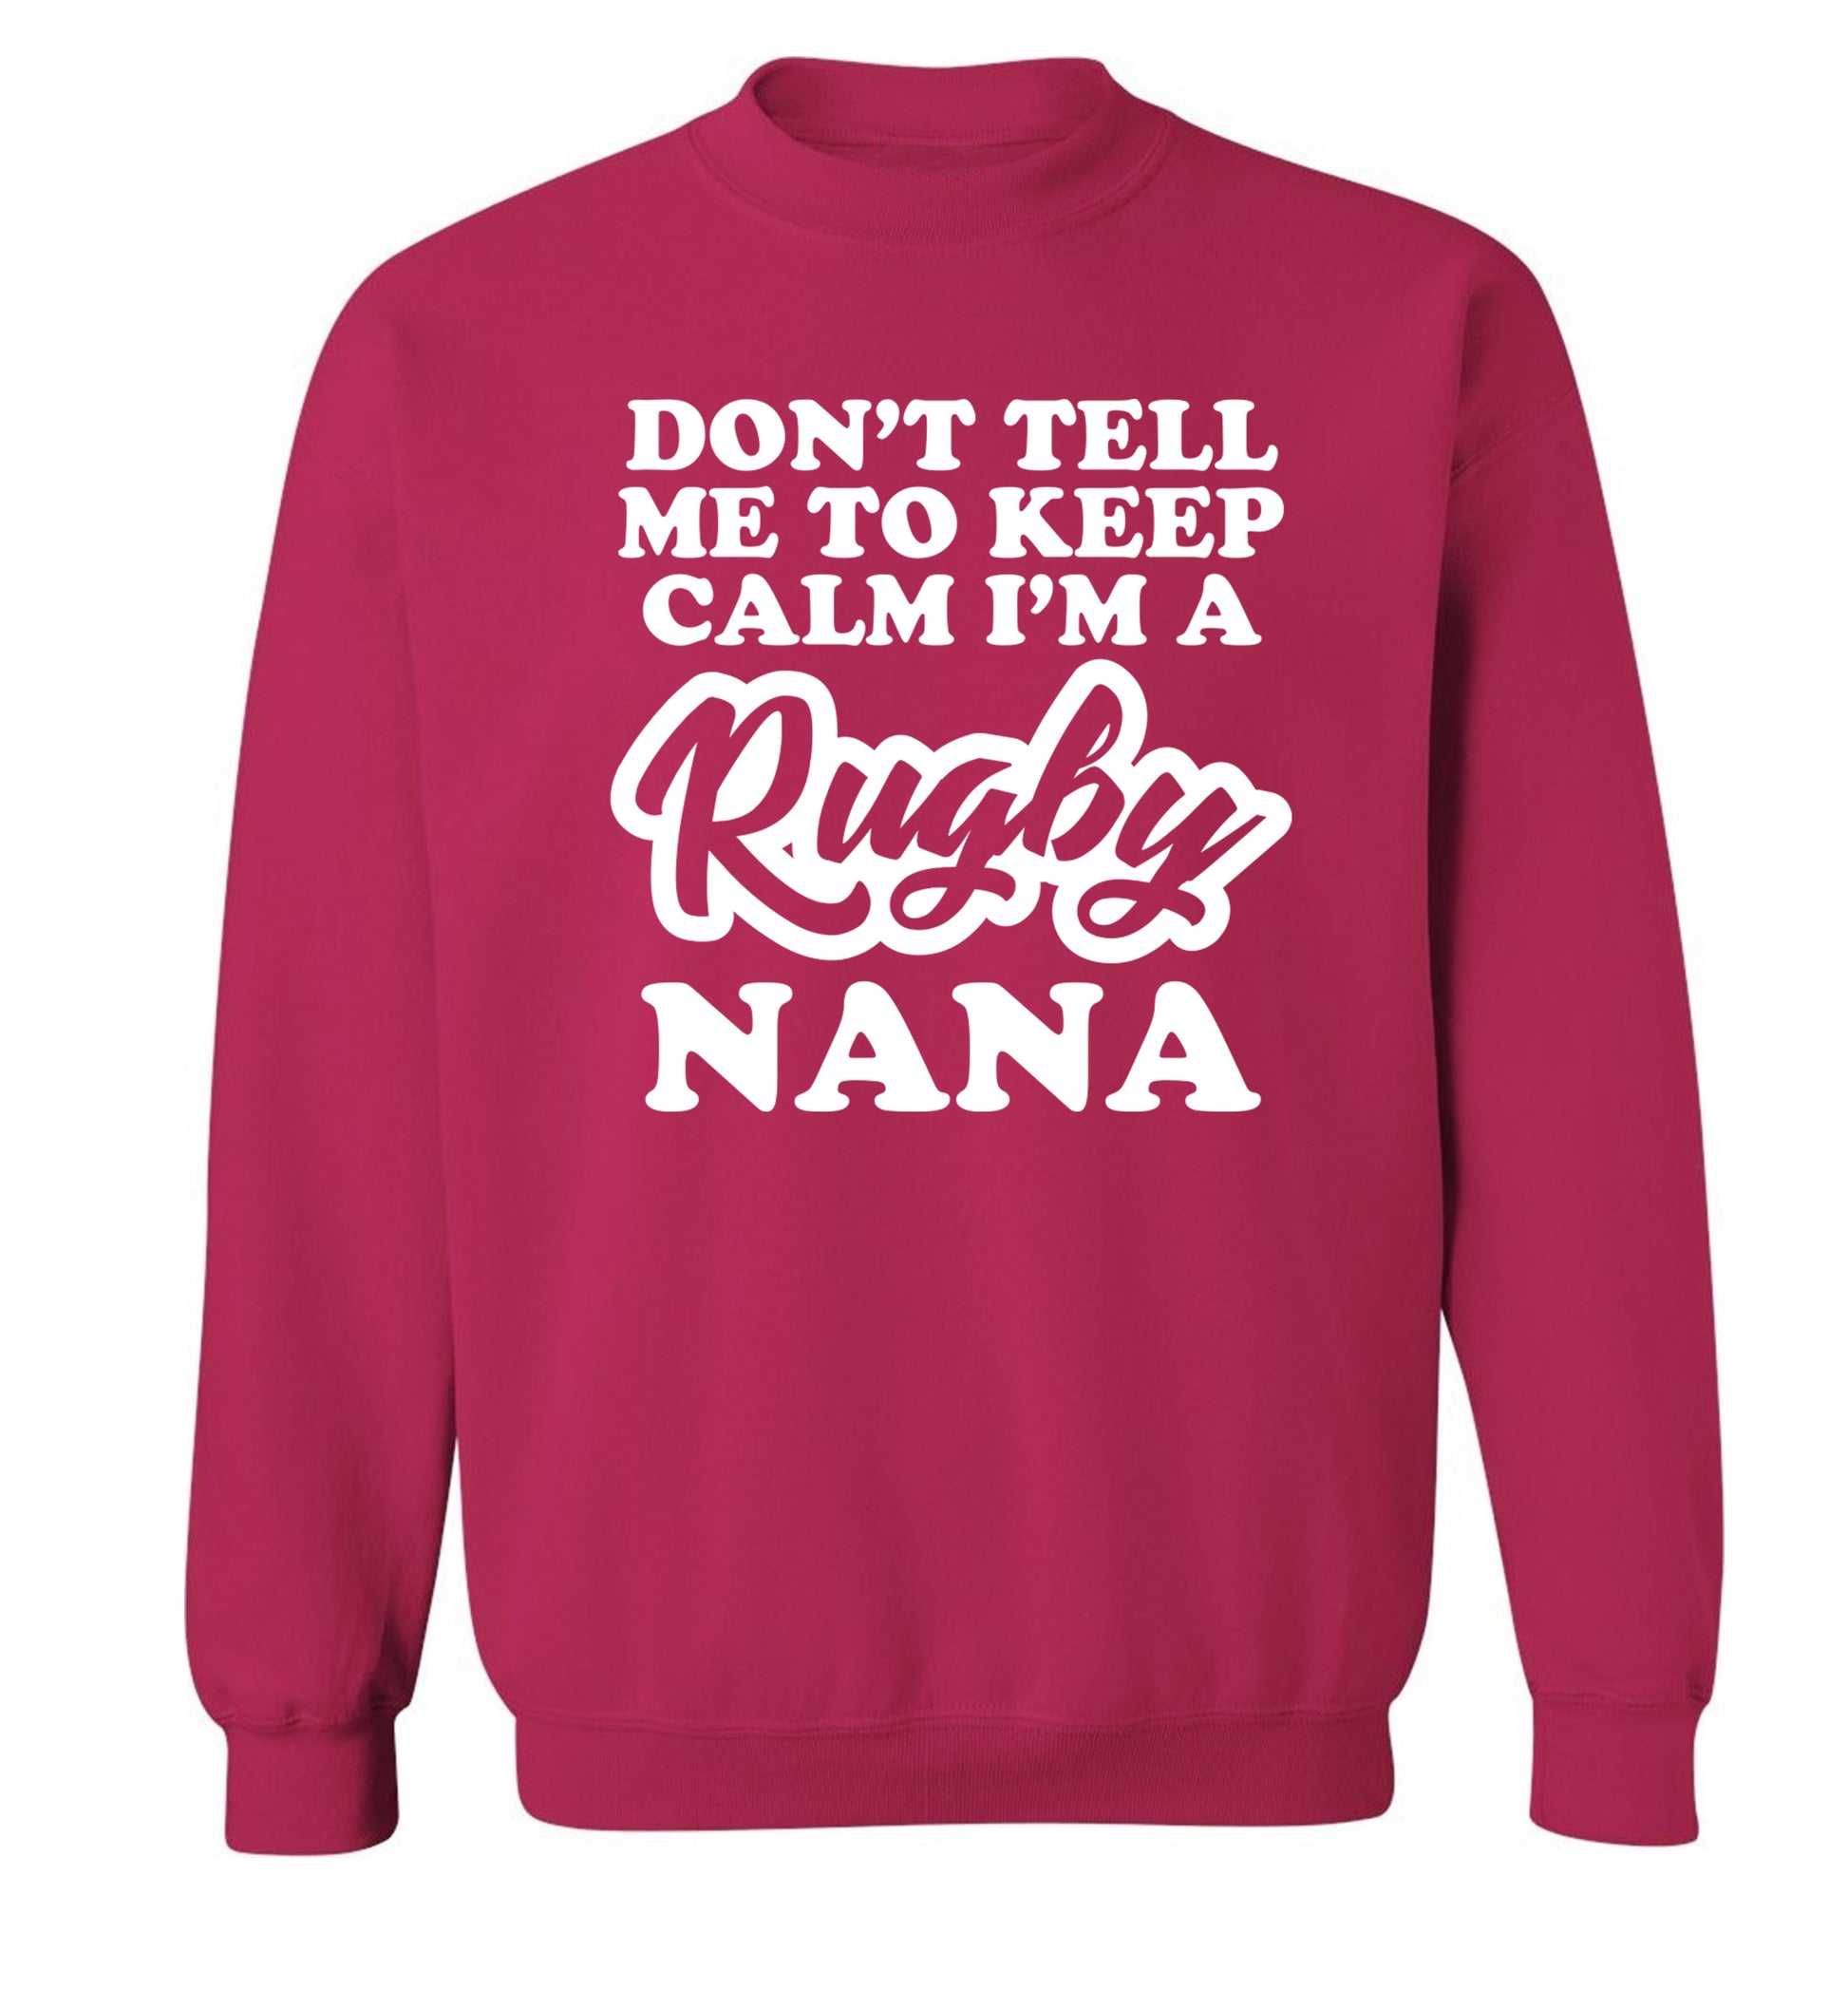 Don't tell me to keep calm I'm a rugby nana Adult's unisex pink Sweater 2XL